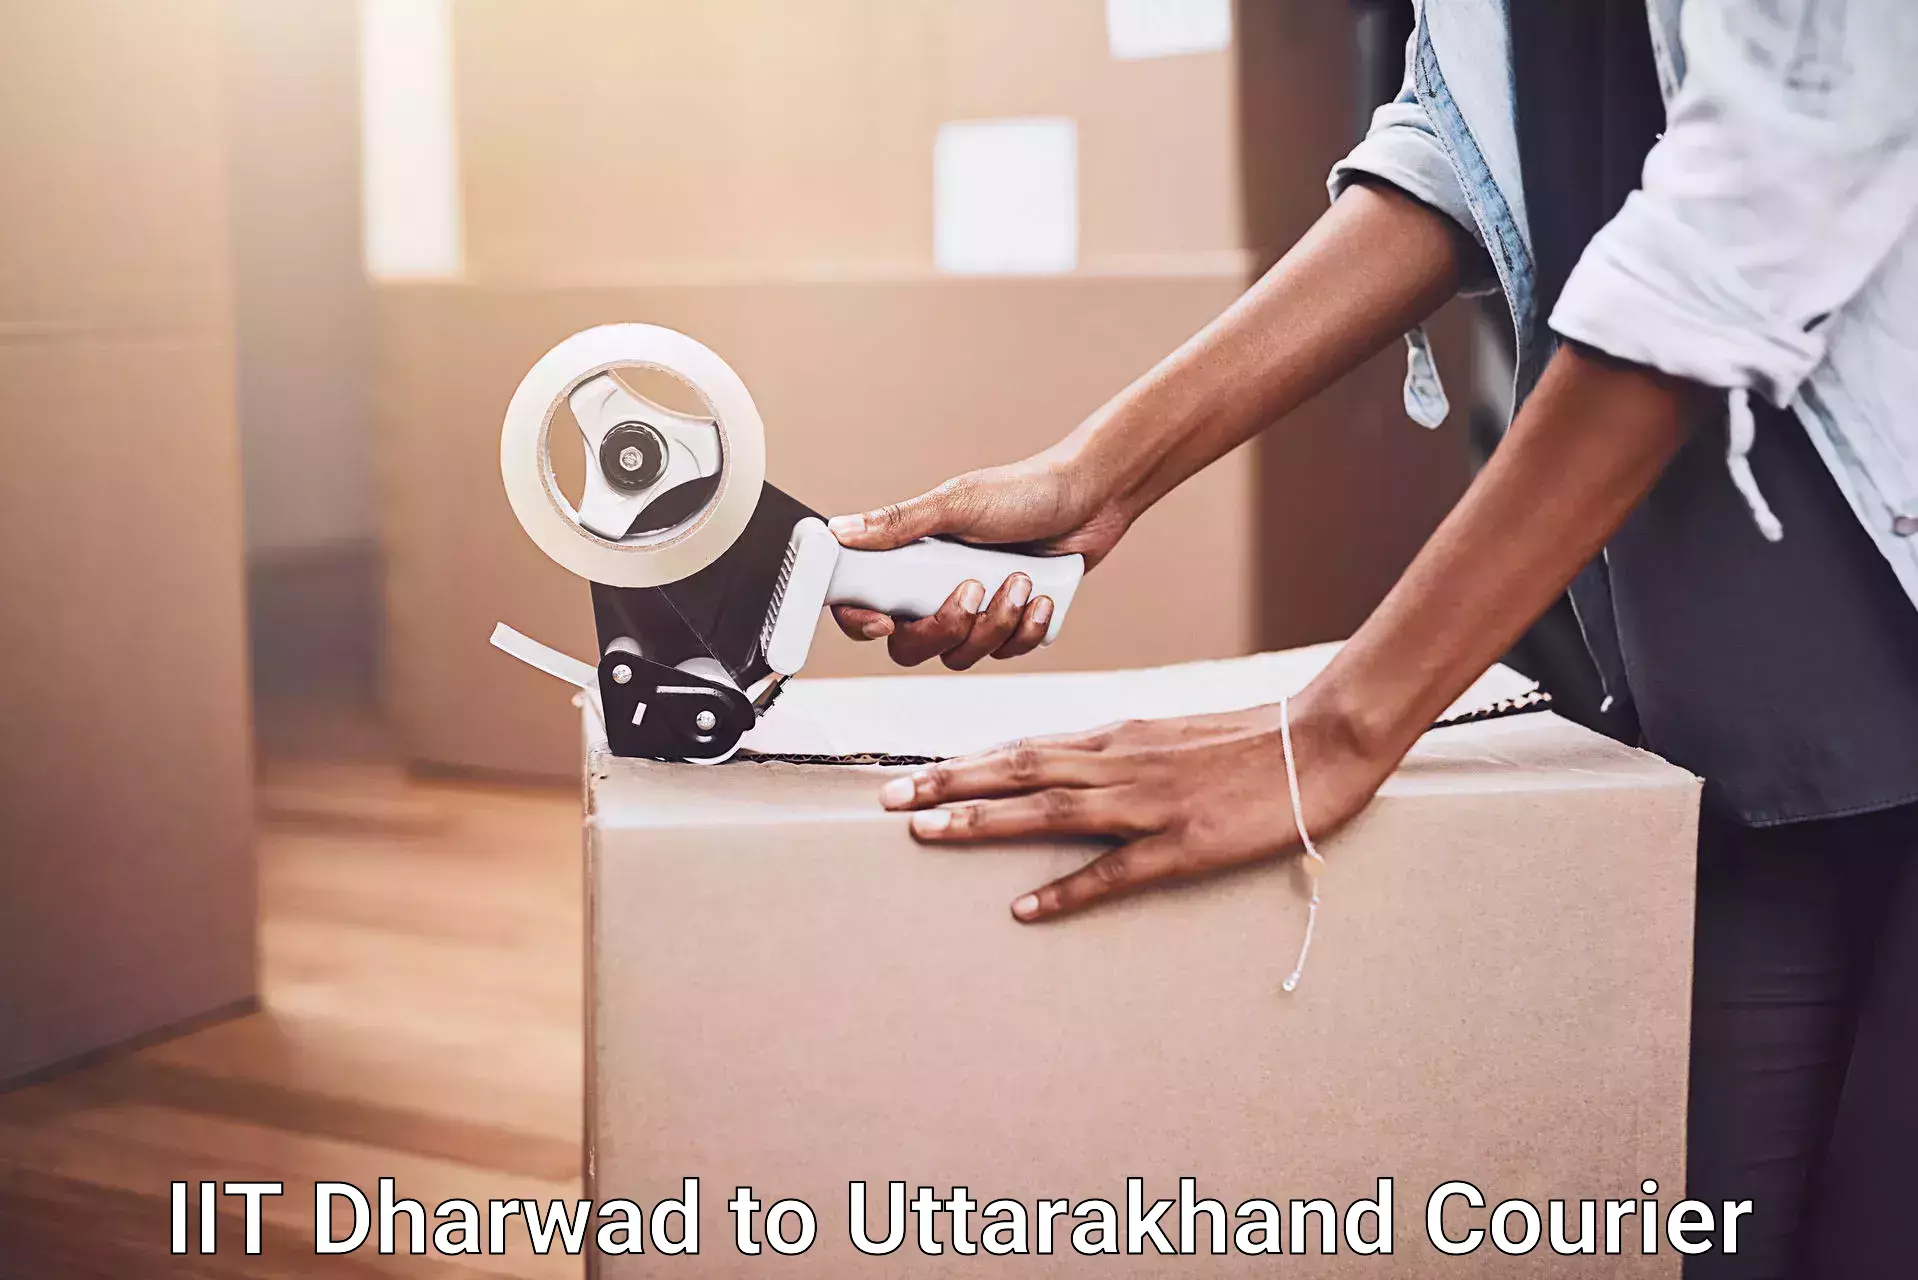 Moving service excellence IIT Dharwad to Dehradun